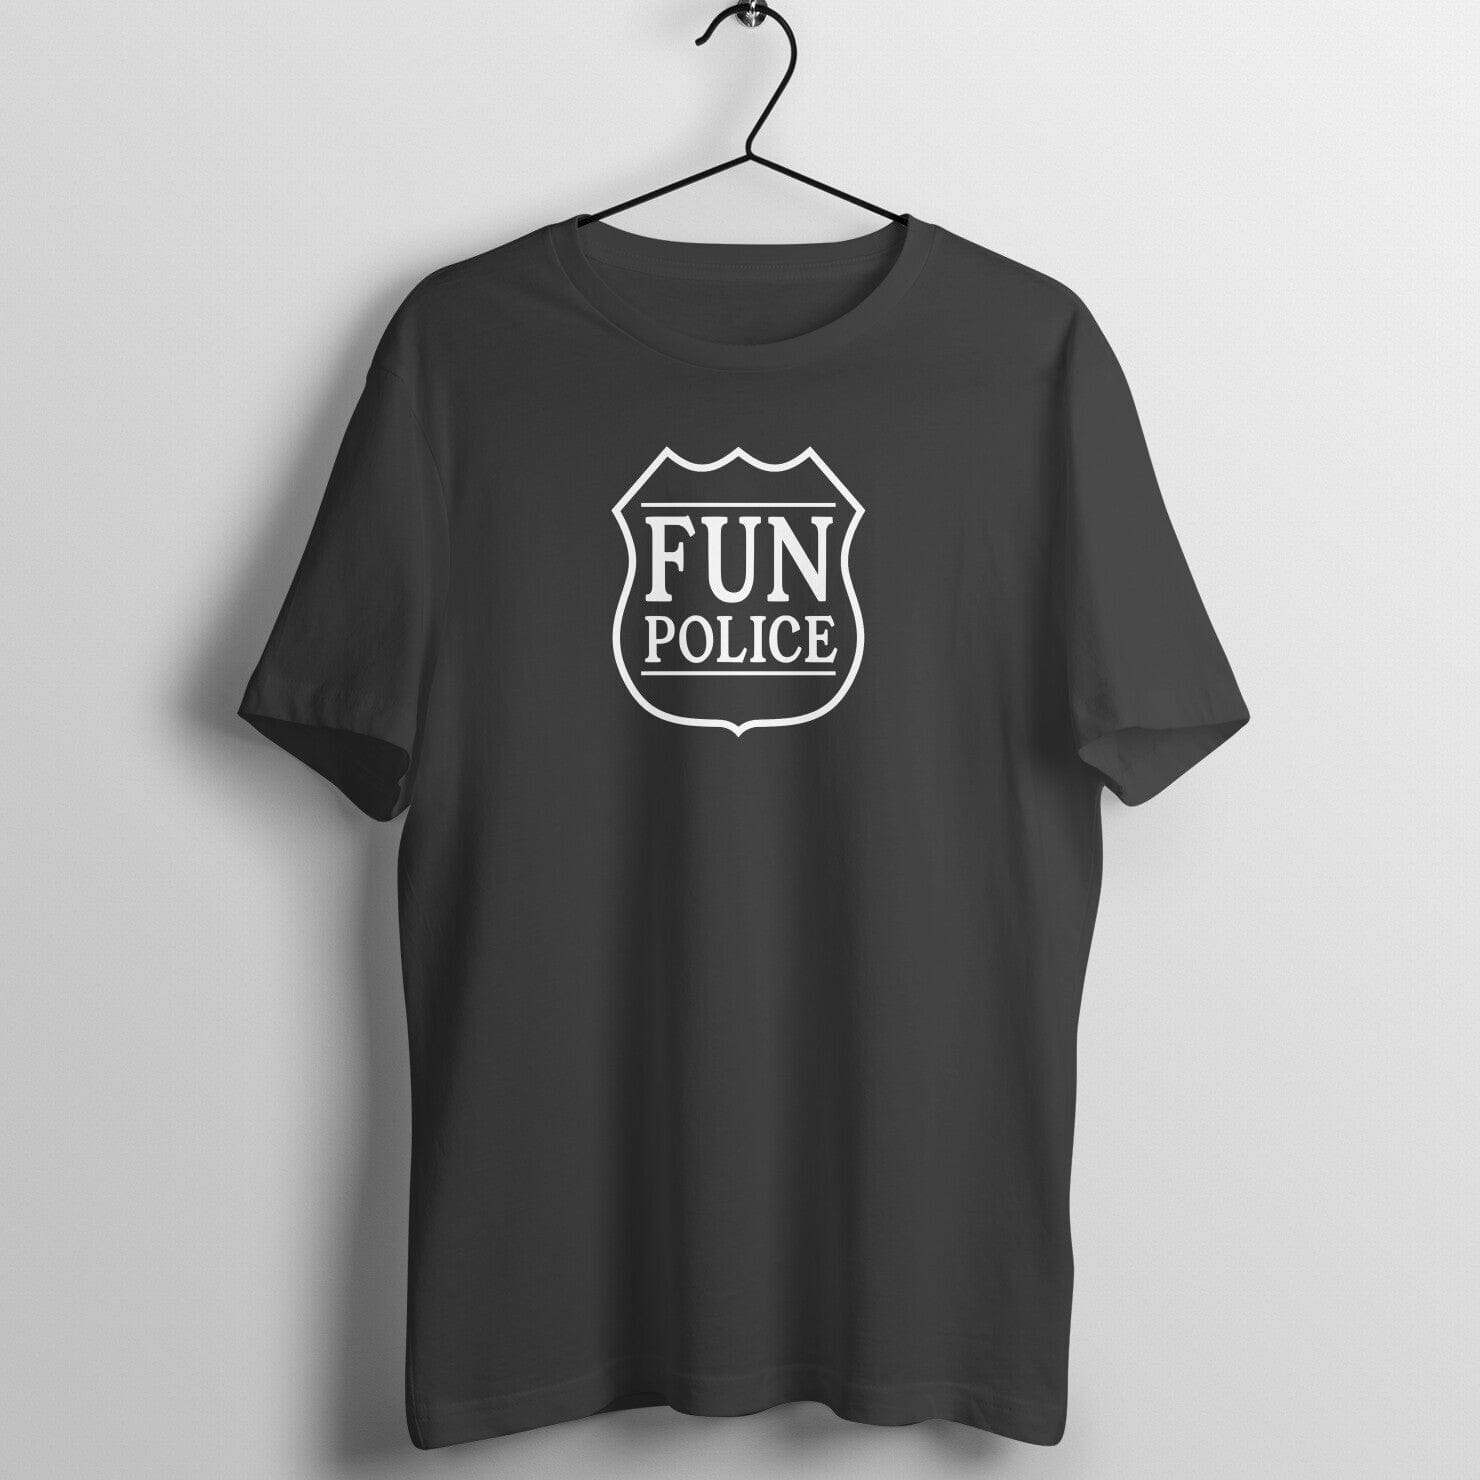 Fun Police Exclusive Black T Shirt for Men and Women Printrove Black S 